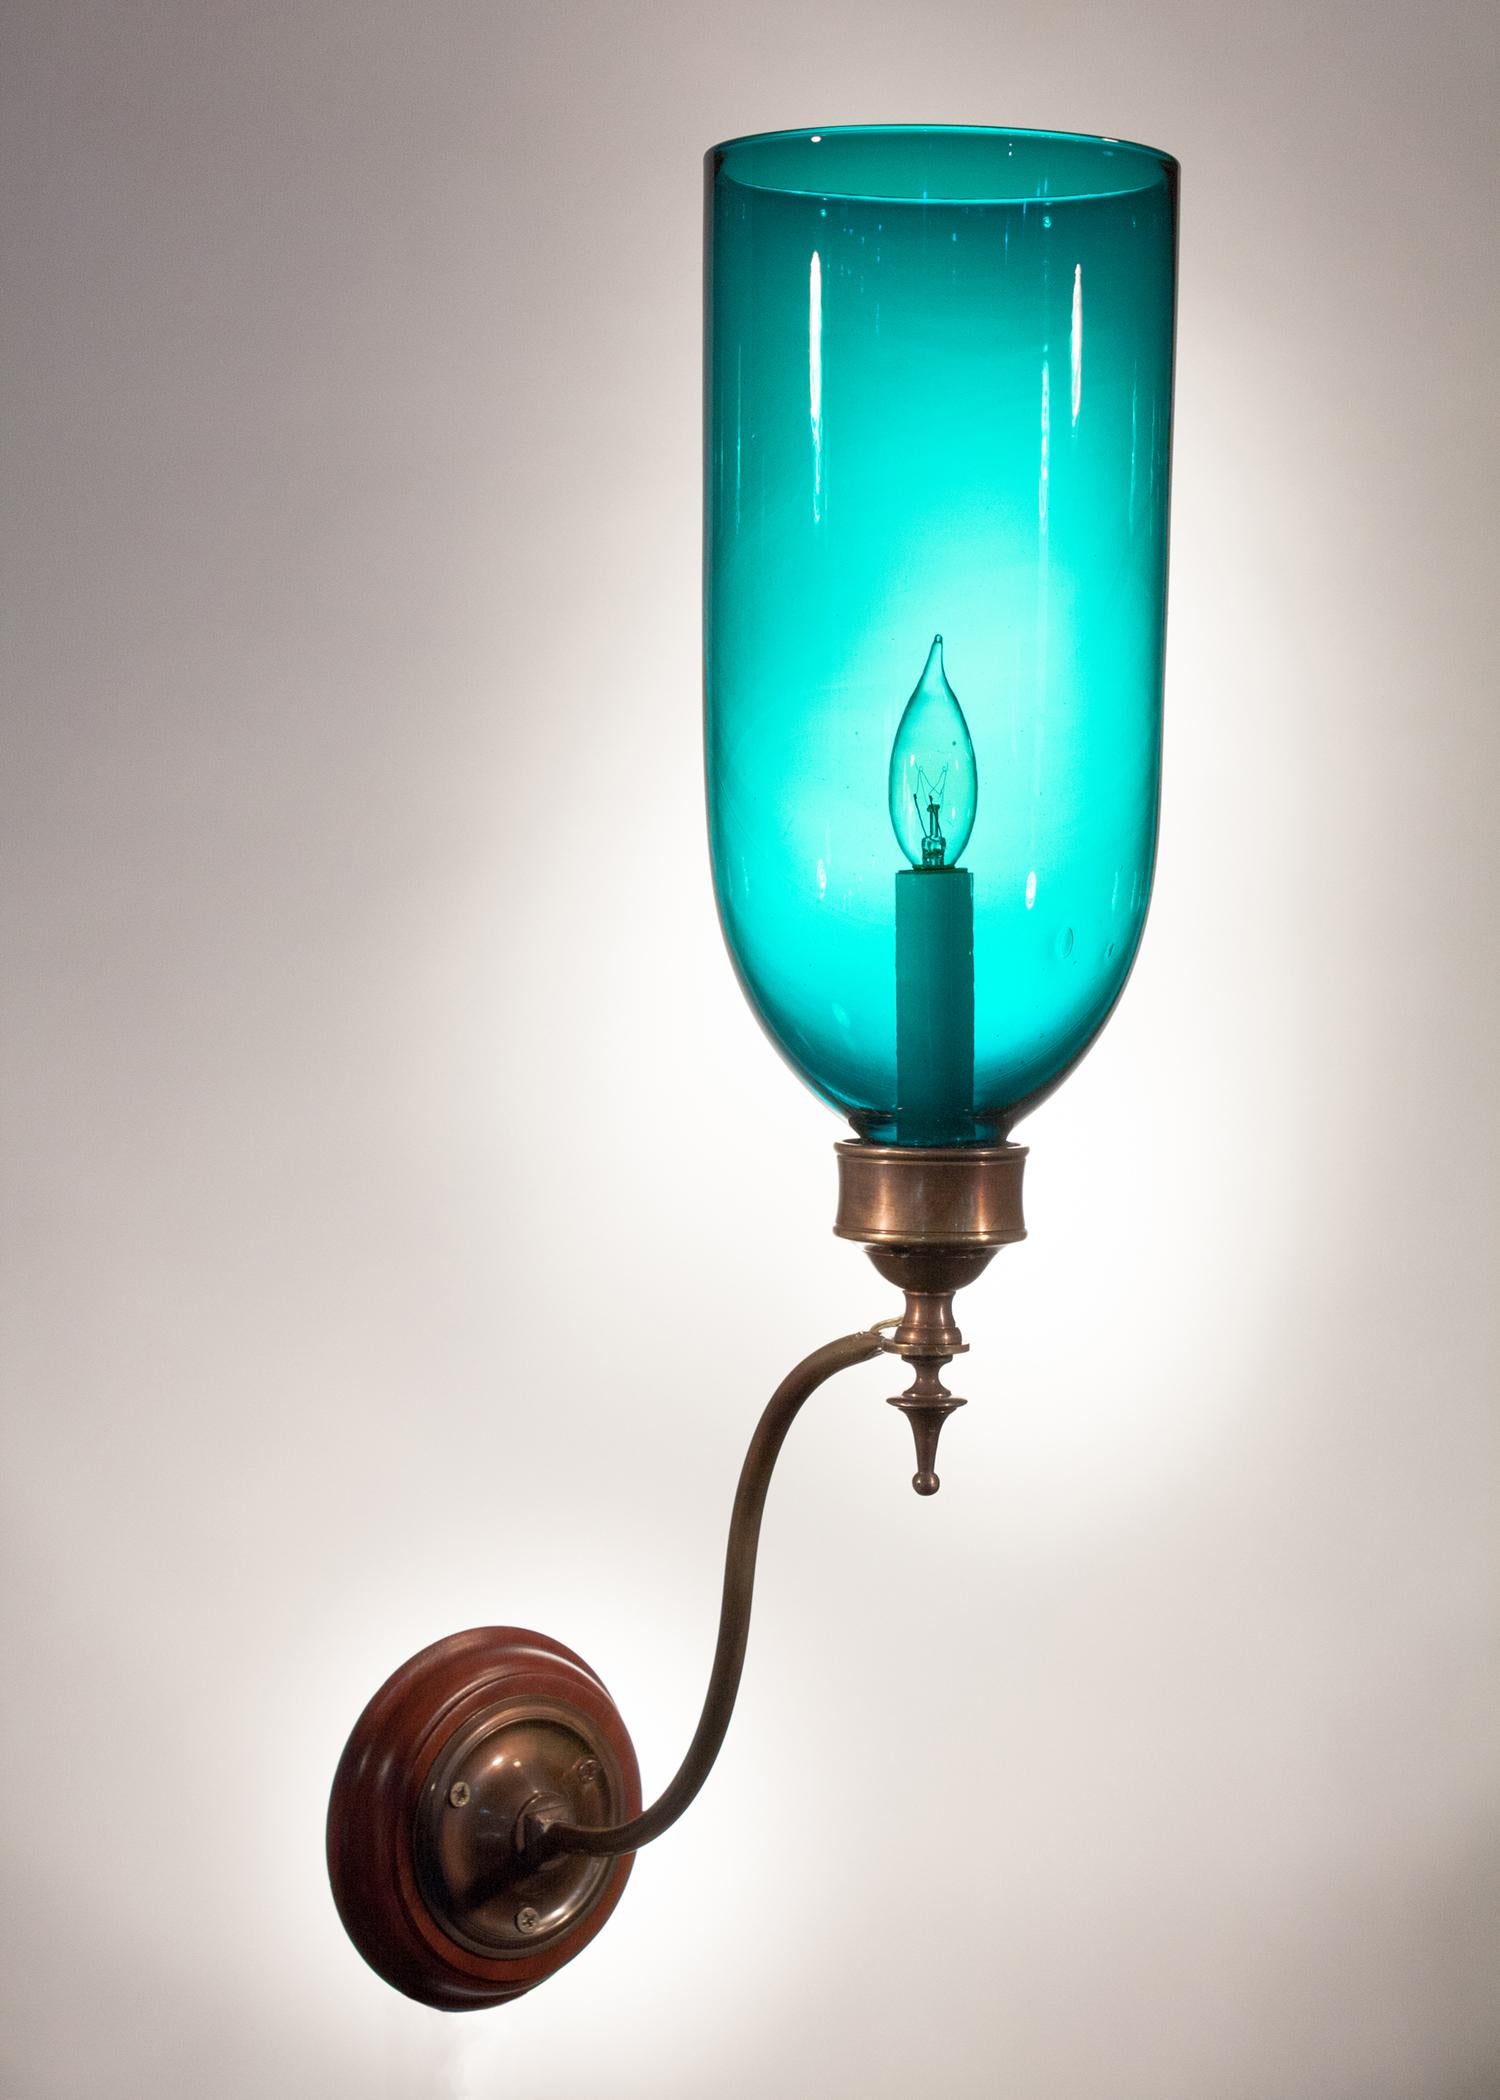 teal wall sconces